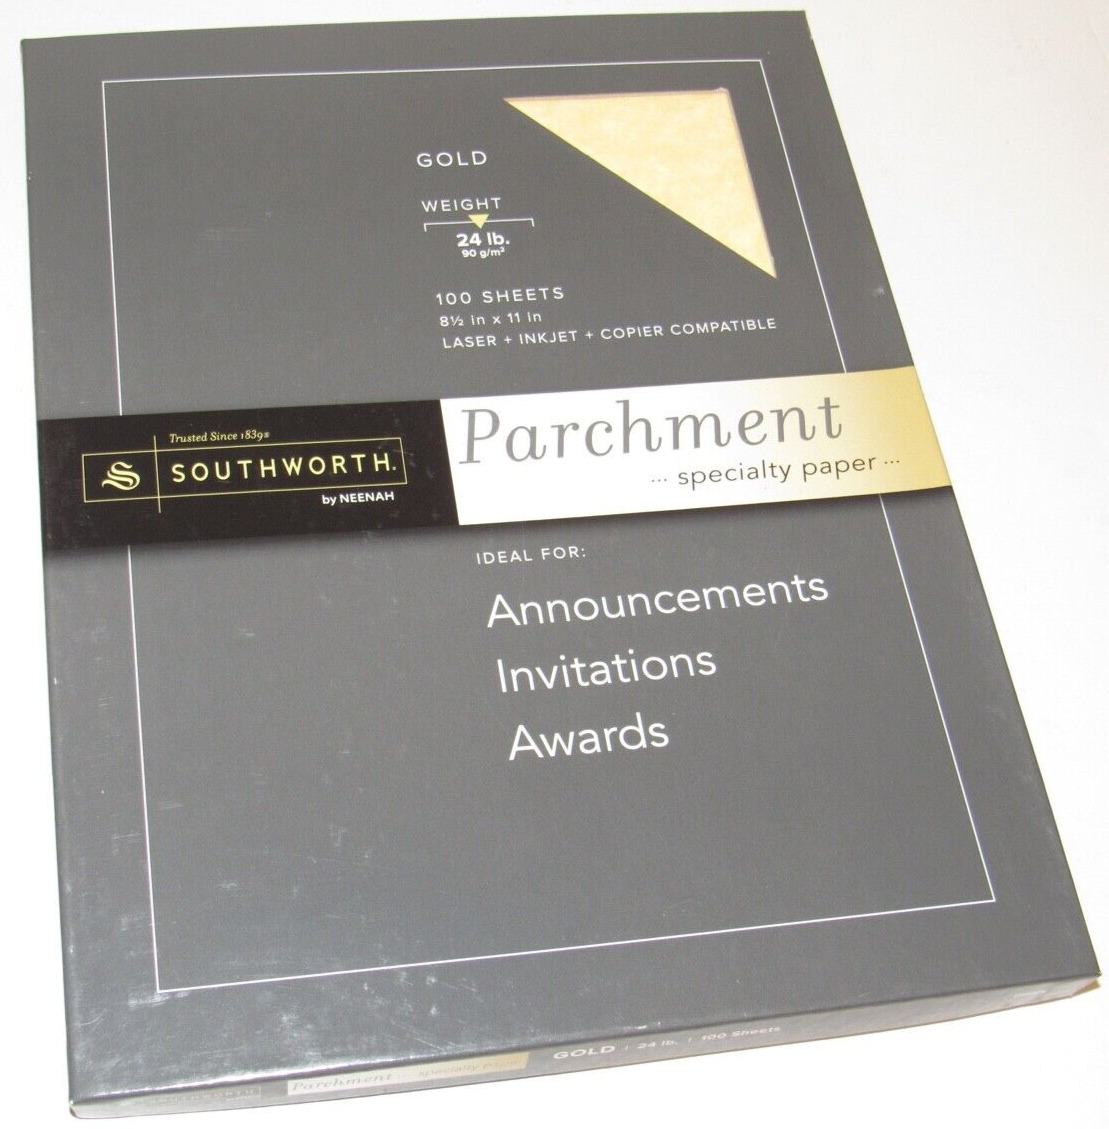 Southworth Parchment Specialty Paper GOLD 100 Sheets 24 Lb Weight P994CK 8.5x11